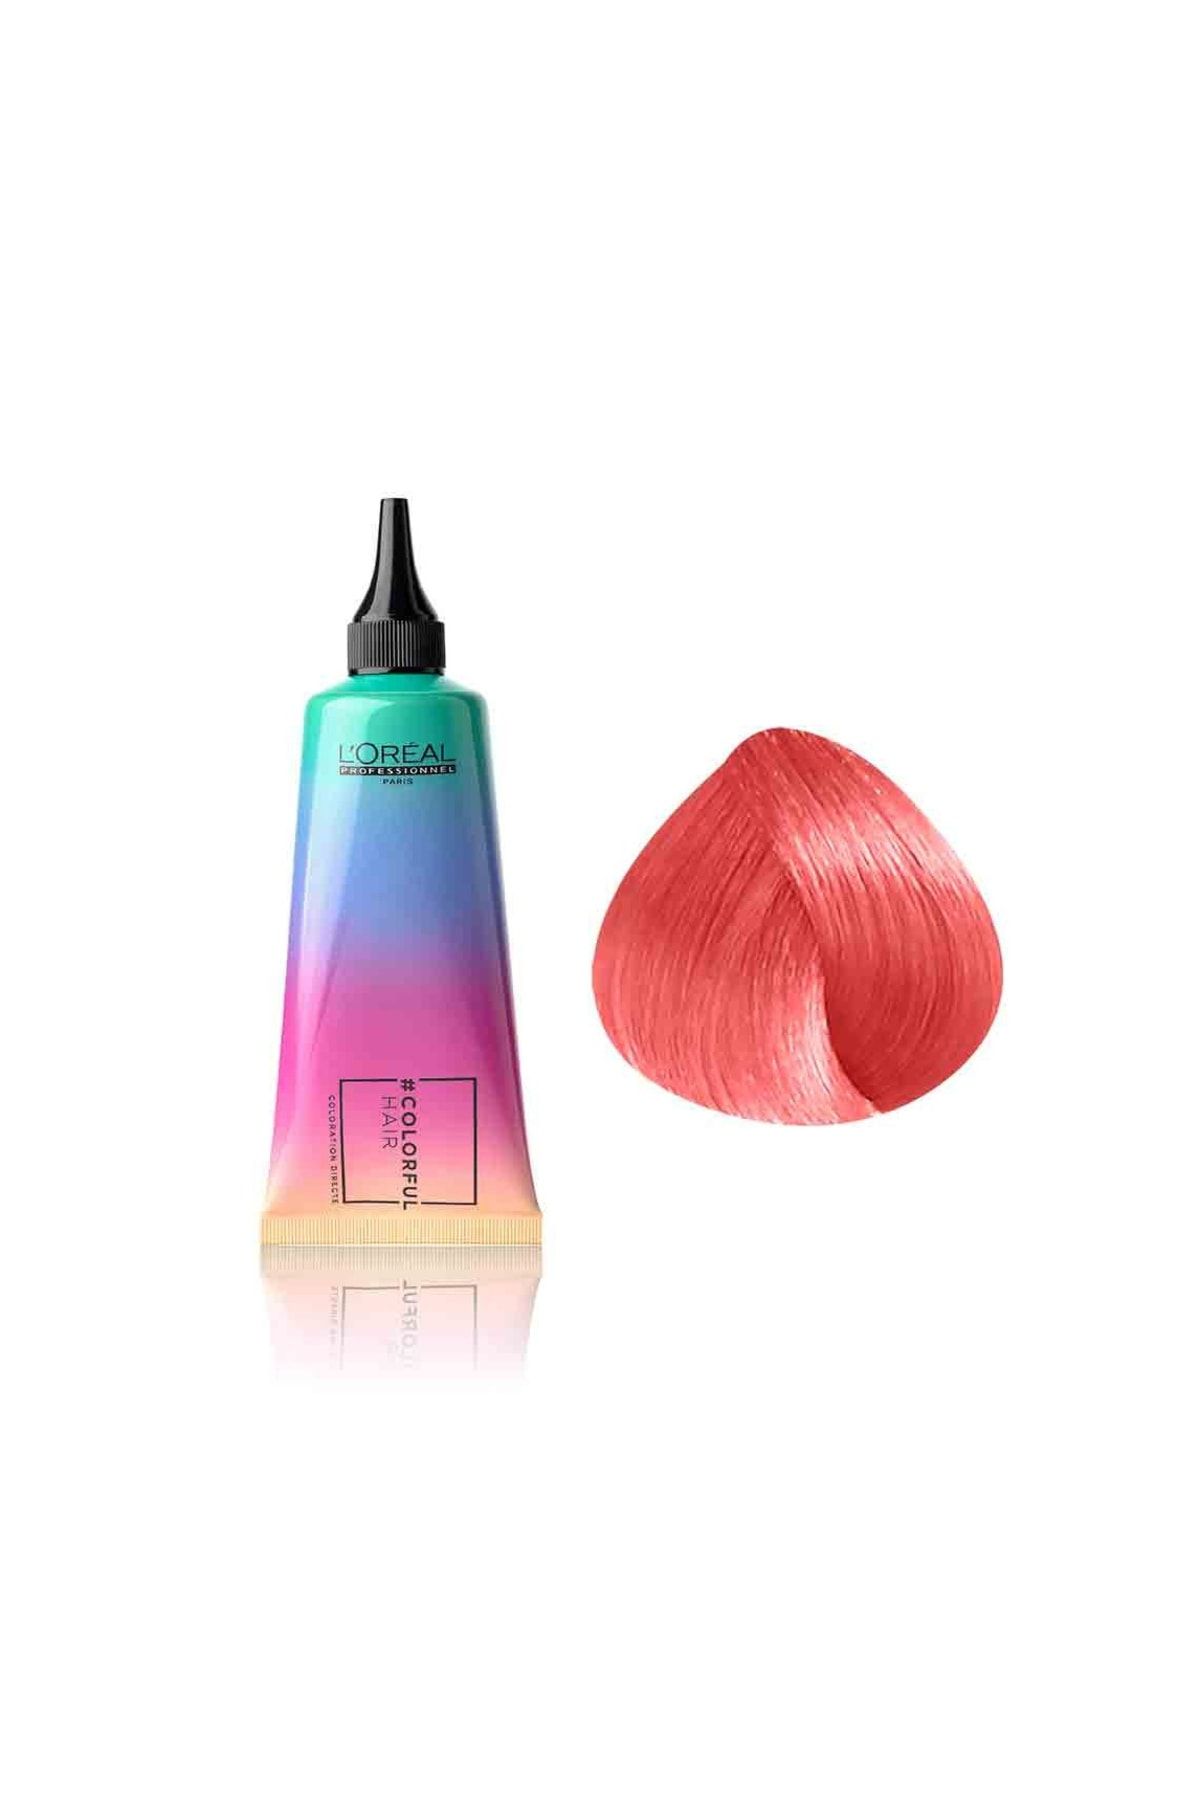 L'oreal Professionnel Colorful Hair Sunset Coral Natural Orange Hair Color Cream 90ml